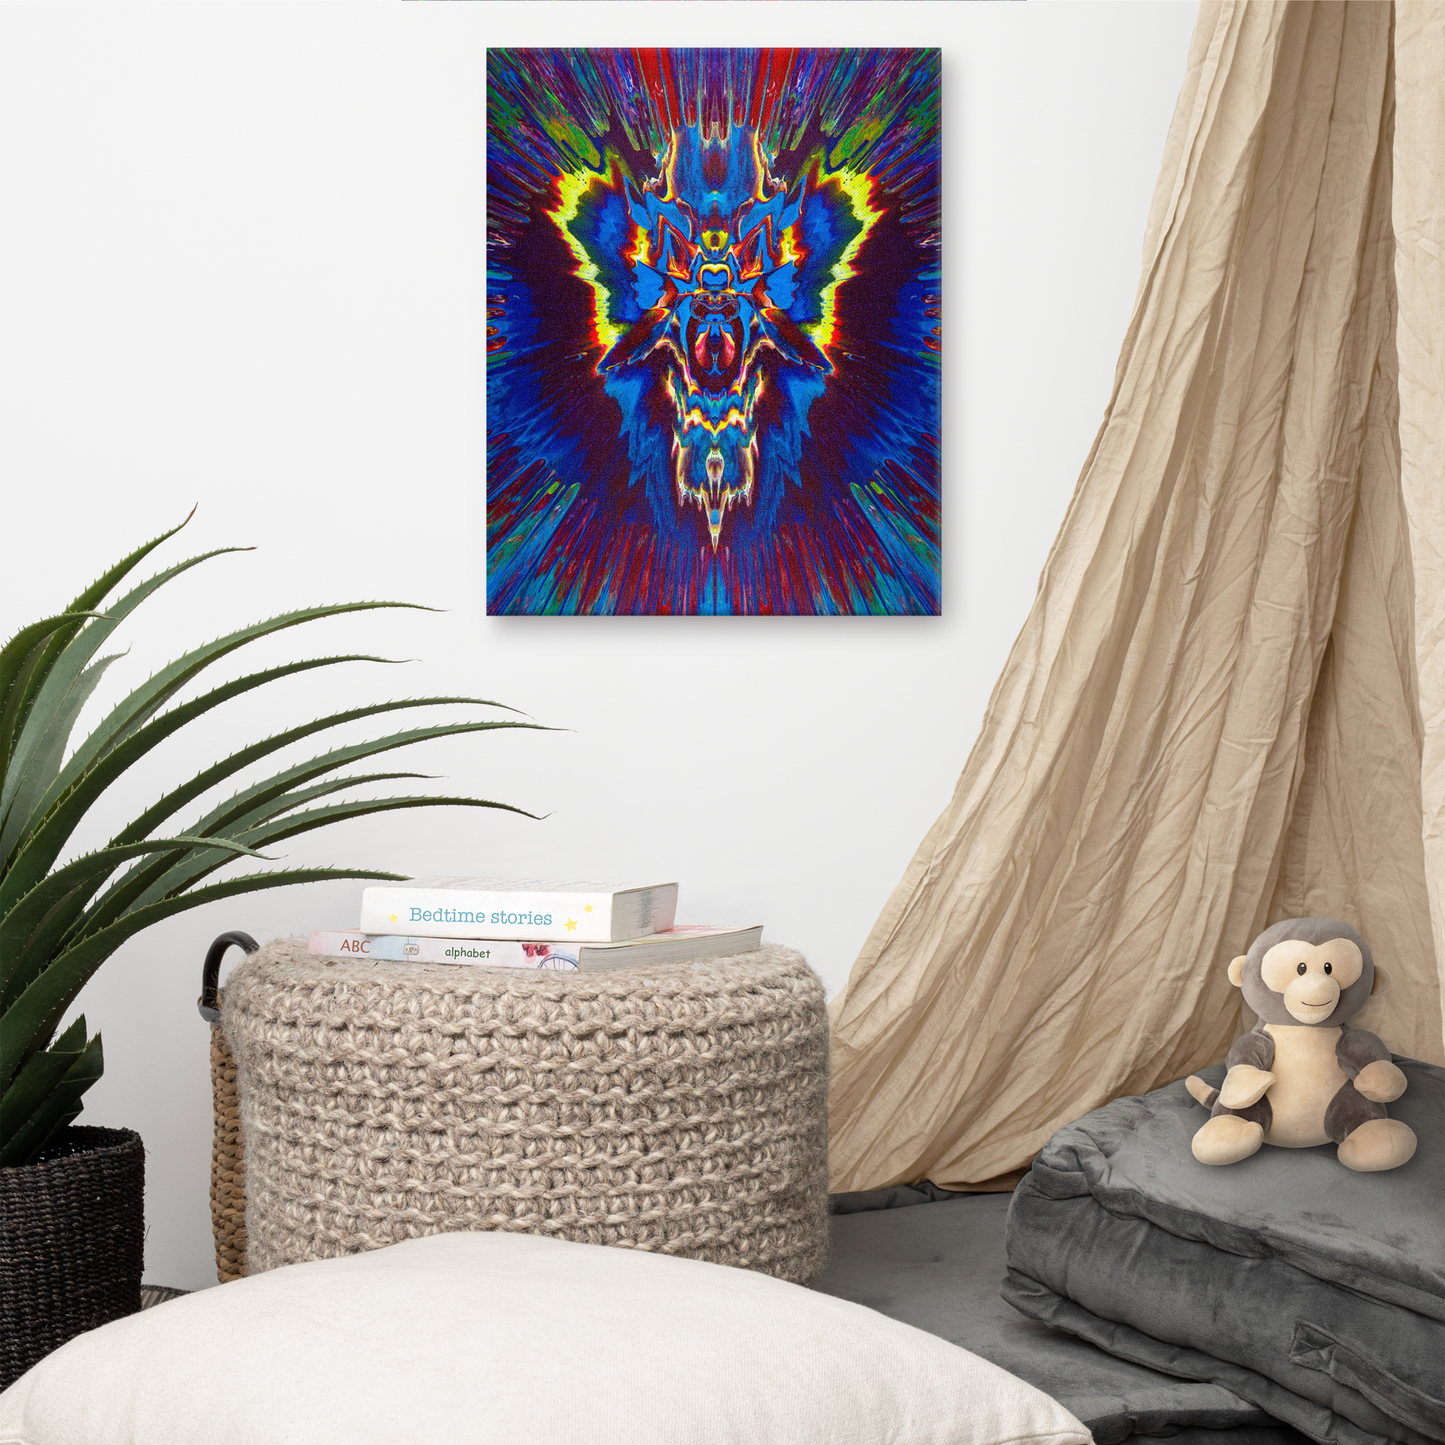 NightOwl Studio Abstract Wall Art, Angel Storm, Boho Living Room, Bedroom, Office, and Home Decor, Premium Canvas with Wooden Frame, Acrylic Painting Reproduction, 16” x 20”